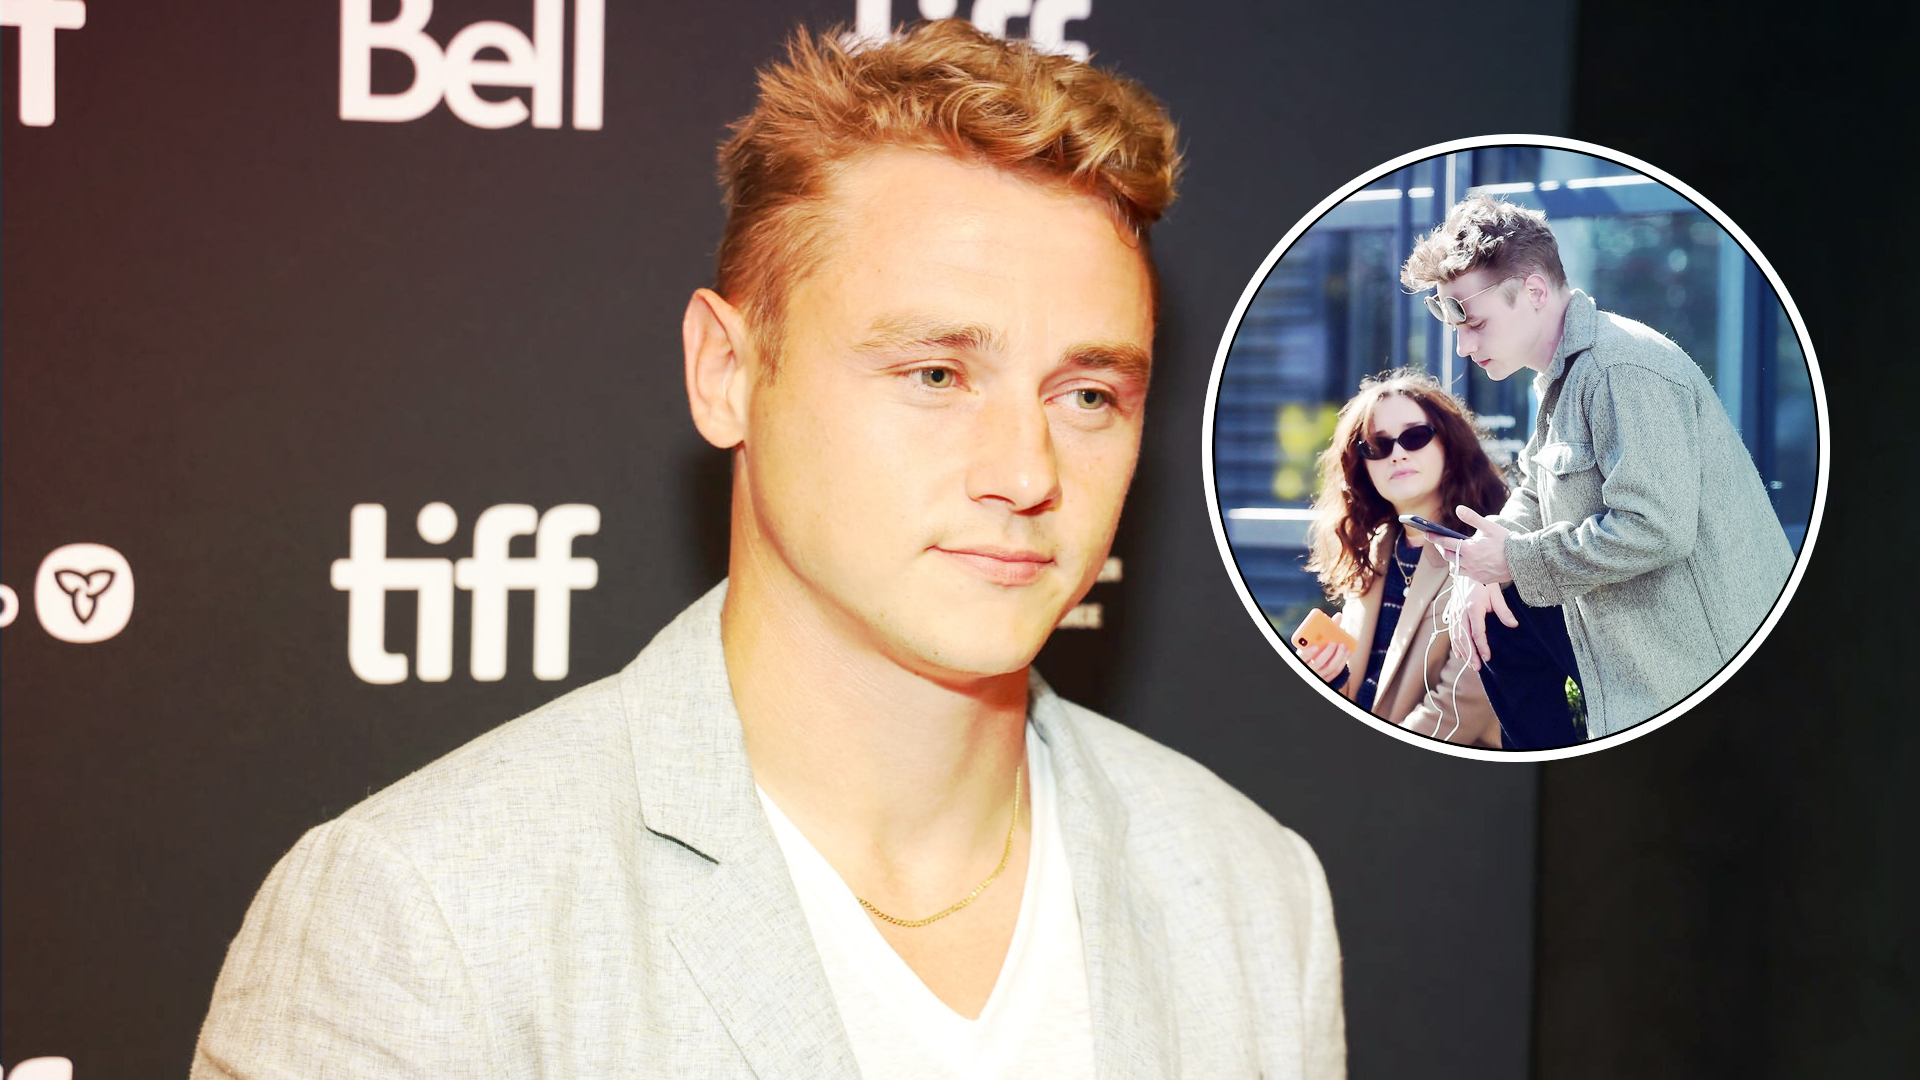 Who Is Ben Hardy In a Relationship?